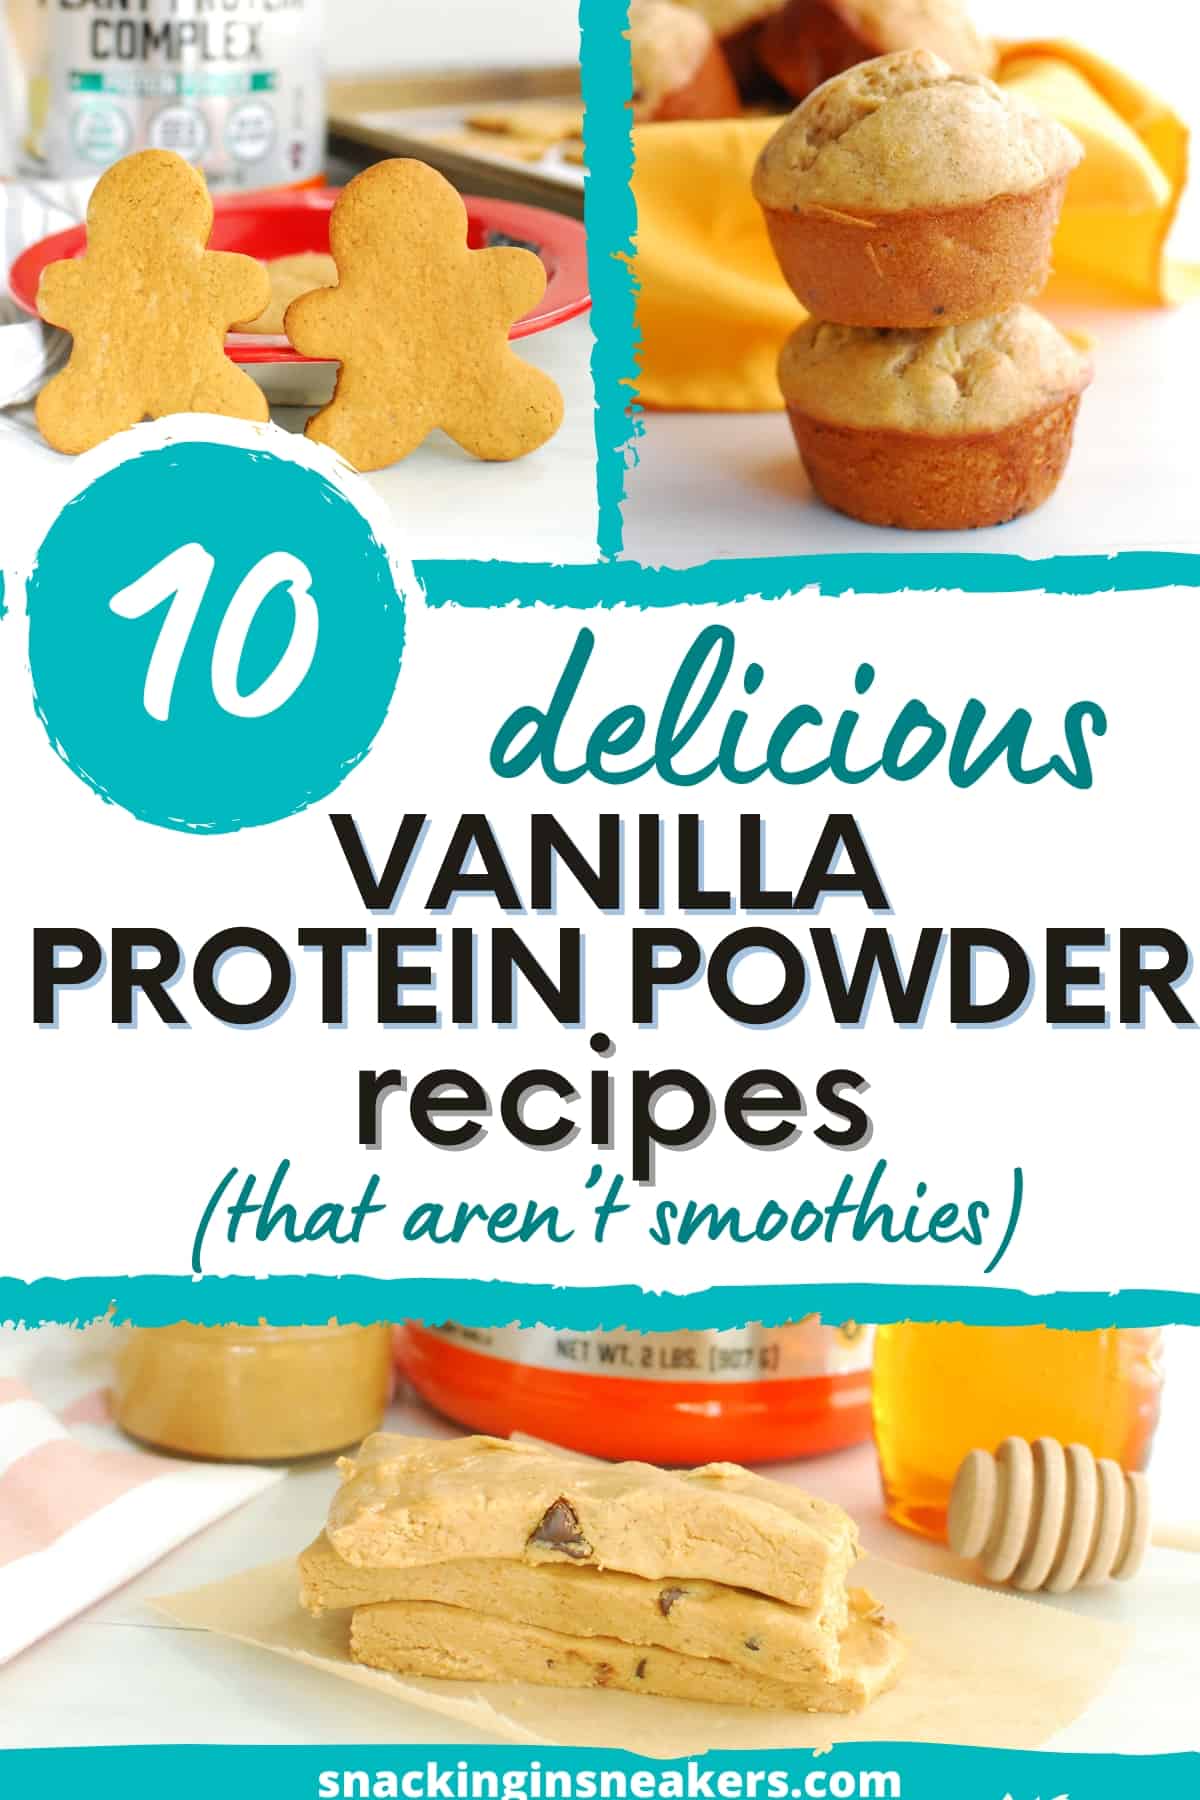 A collage of protein gingerbread cookies, banana muffins, and protein bars, with a text overlay that says 10 delicious vanilla protein powder recipes that aren't smoothies.